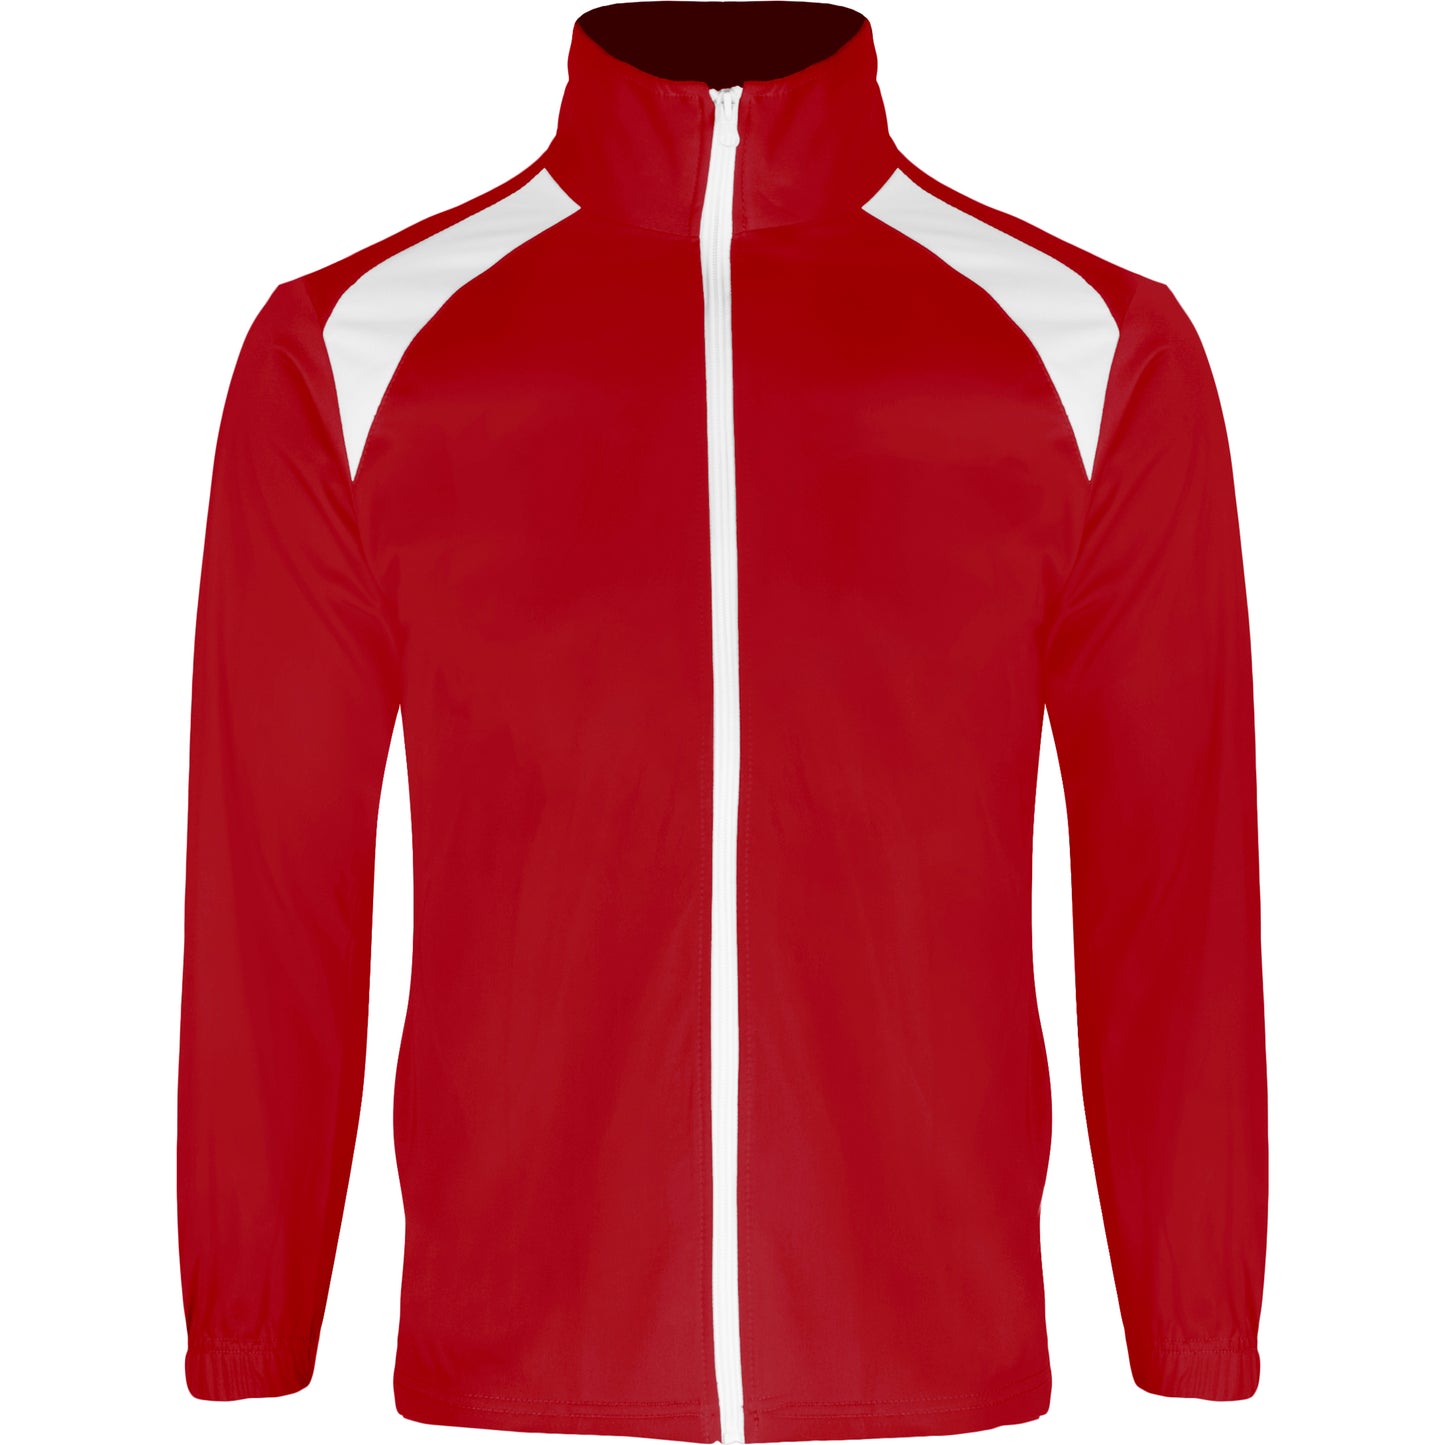 Unisex Arena Tracksuit - Red Only